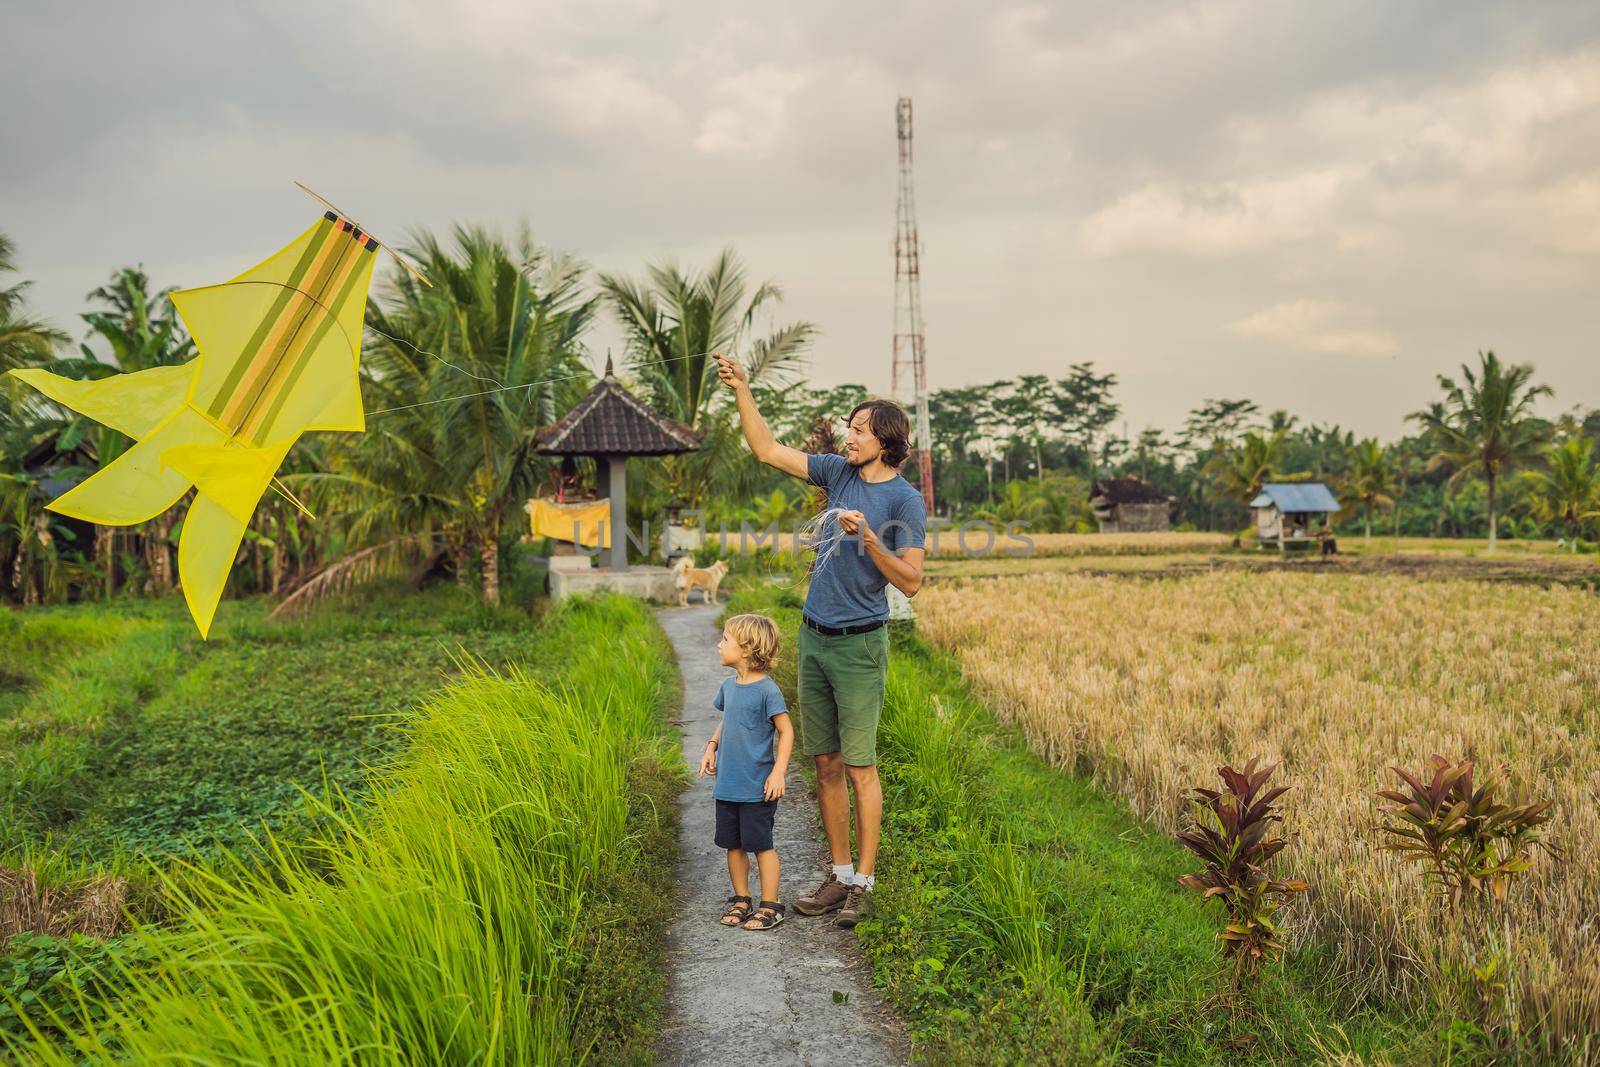 Dad and son launch a kite in a rice field in Ubud, Bali Island, Indonesia.